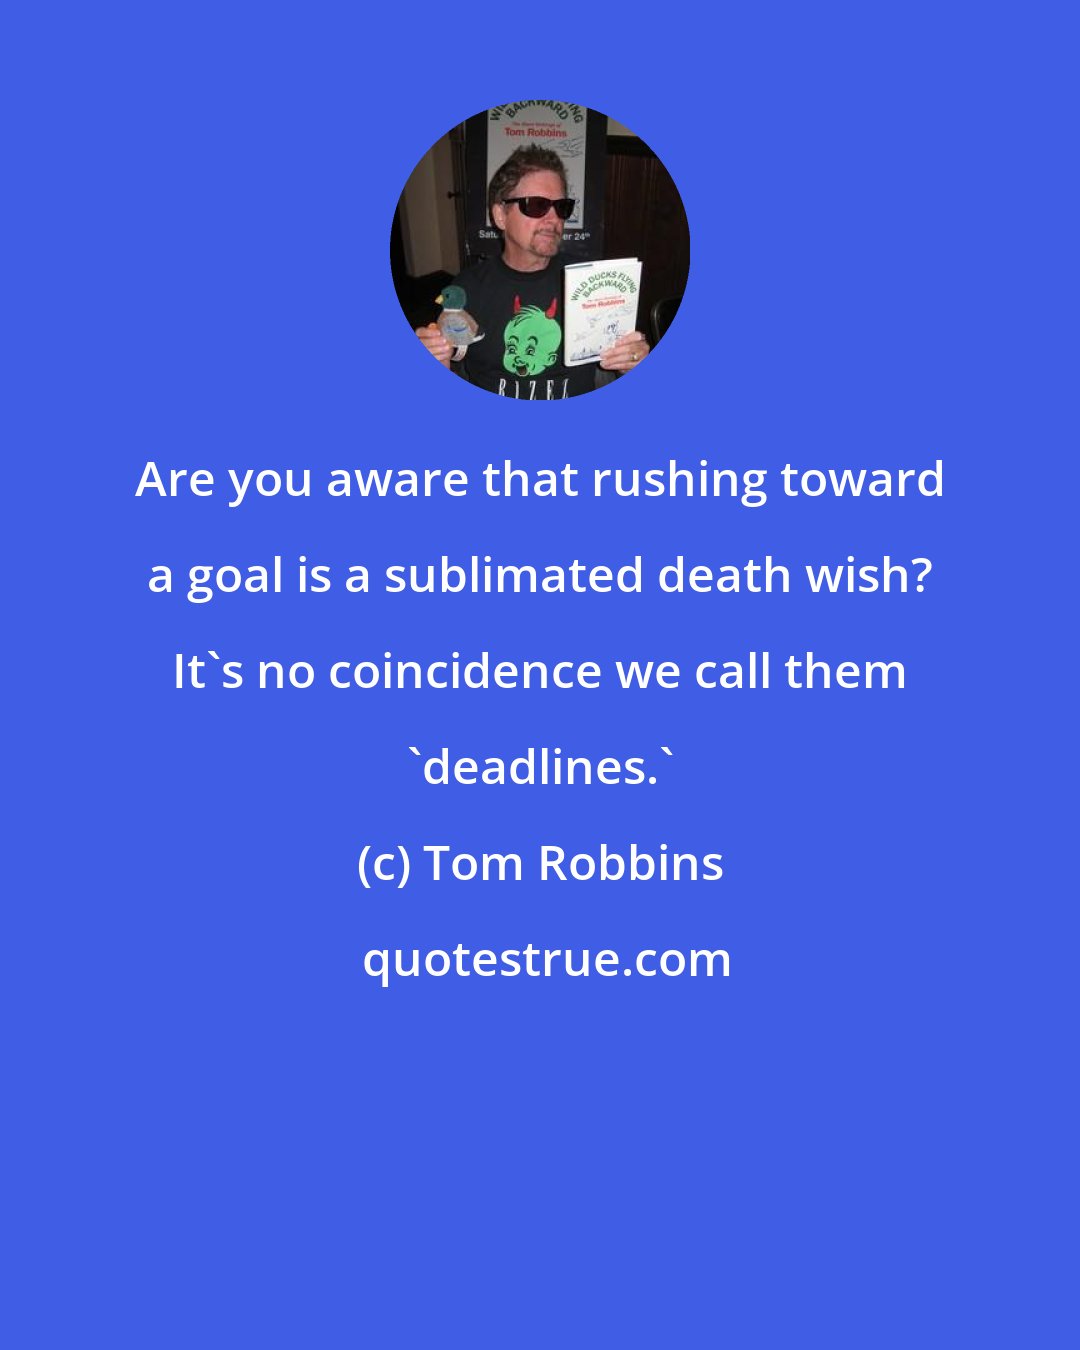 Tom Robbins: Are you aware that rushing toward a goal is a sublimated death wish? It's no coincidence we call them 'deadlines.'